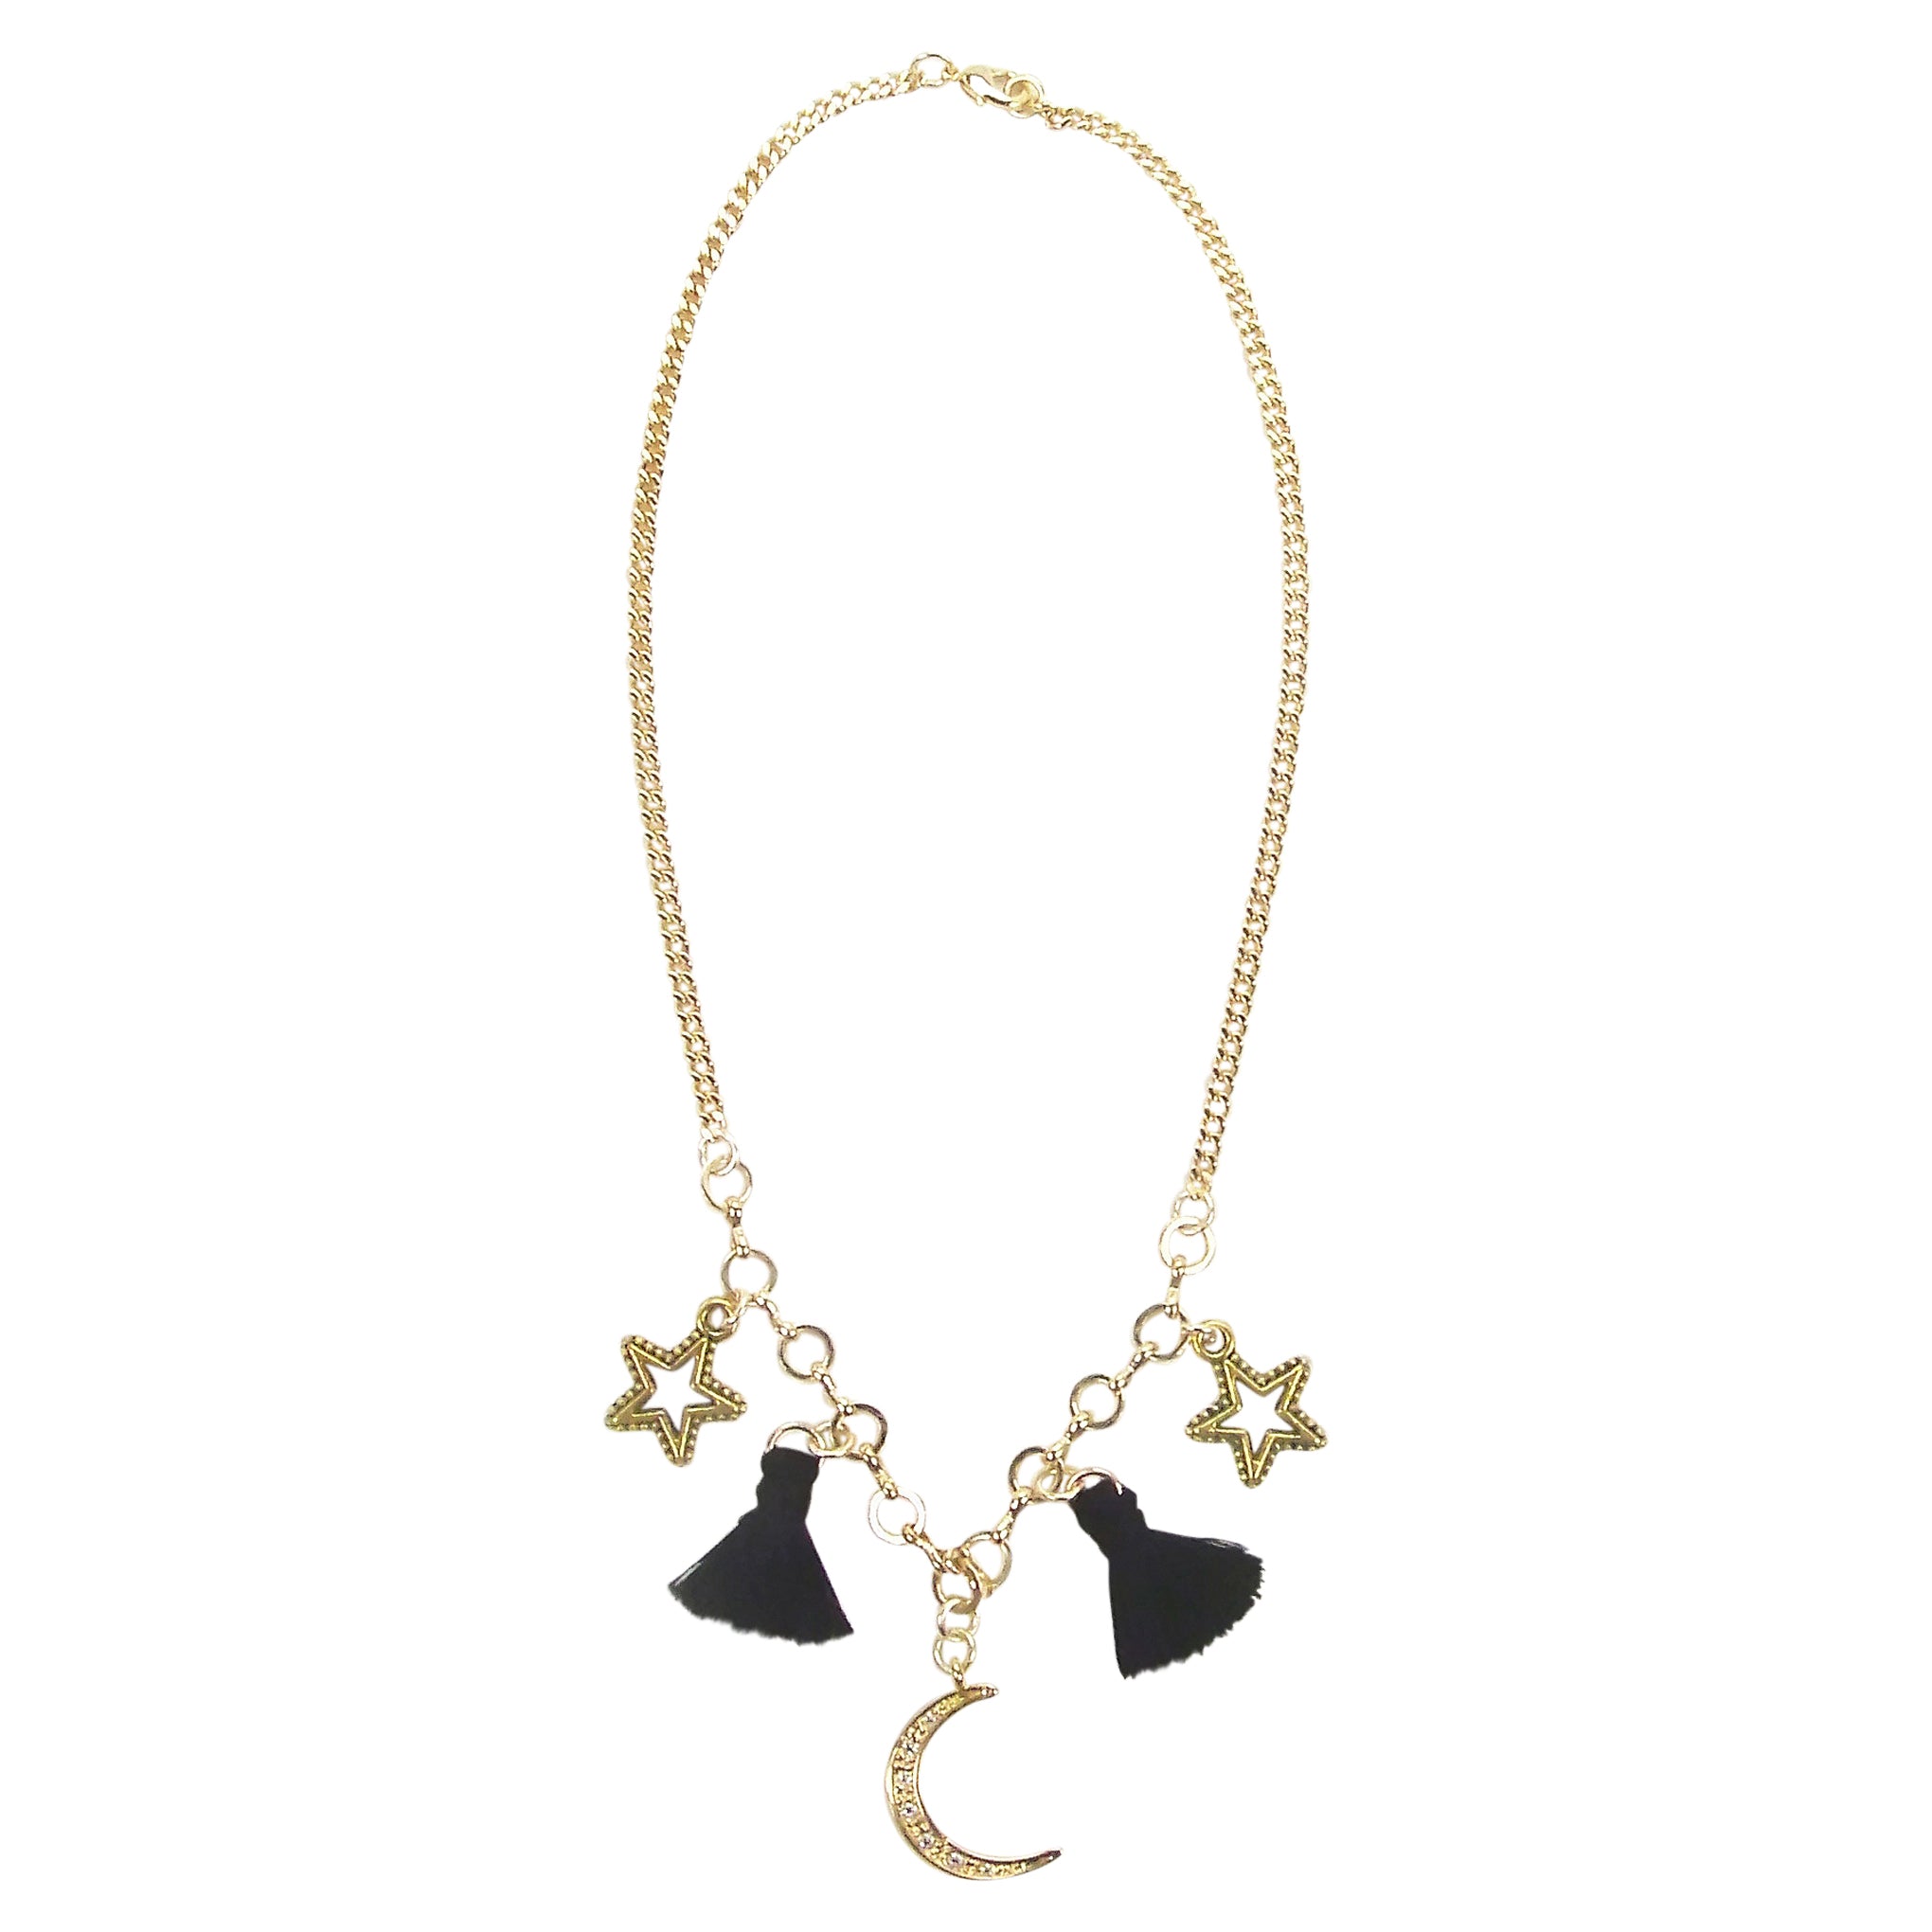 Yunis K Moon Stars and Tassel Necklace in Black and Gold Plated